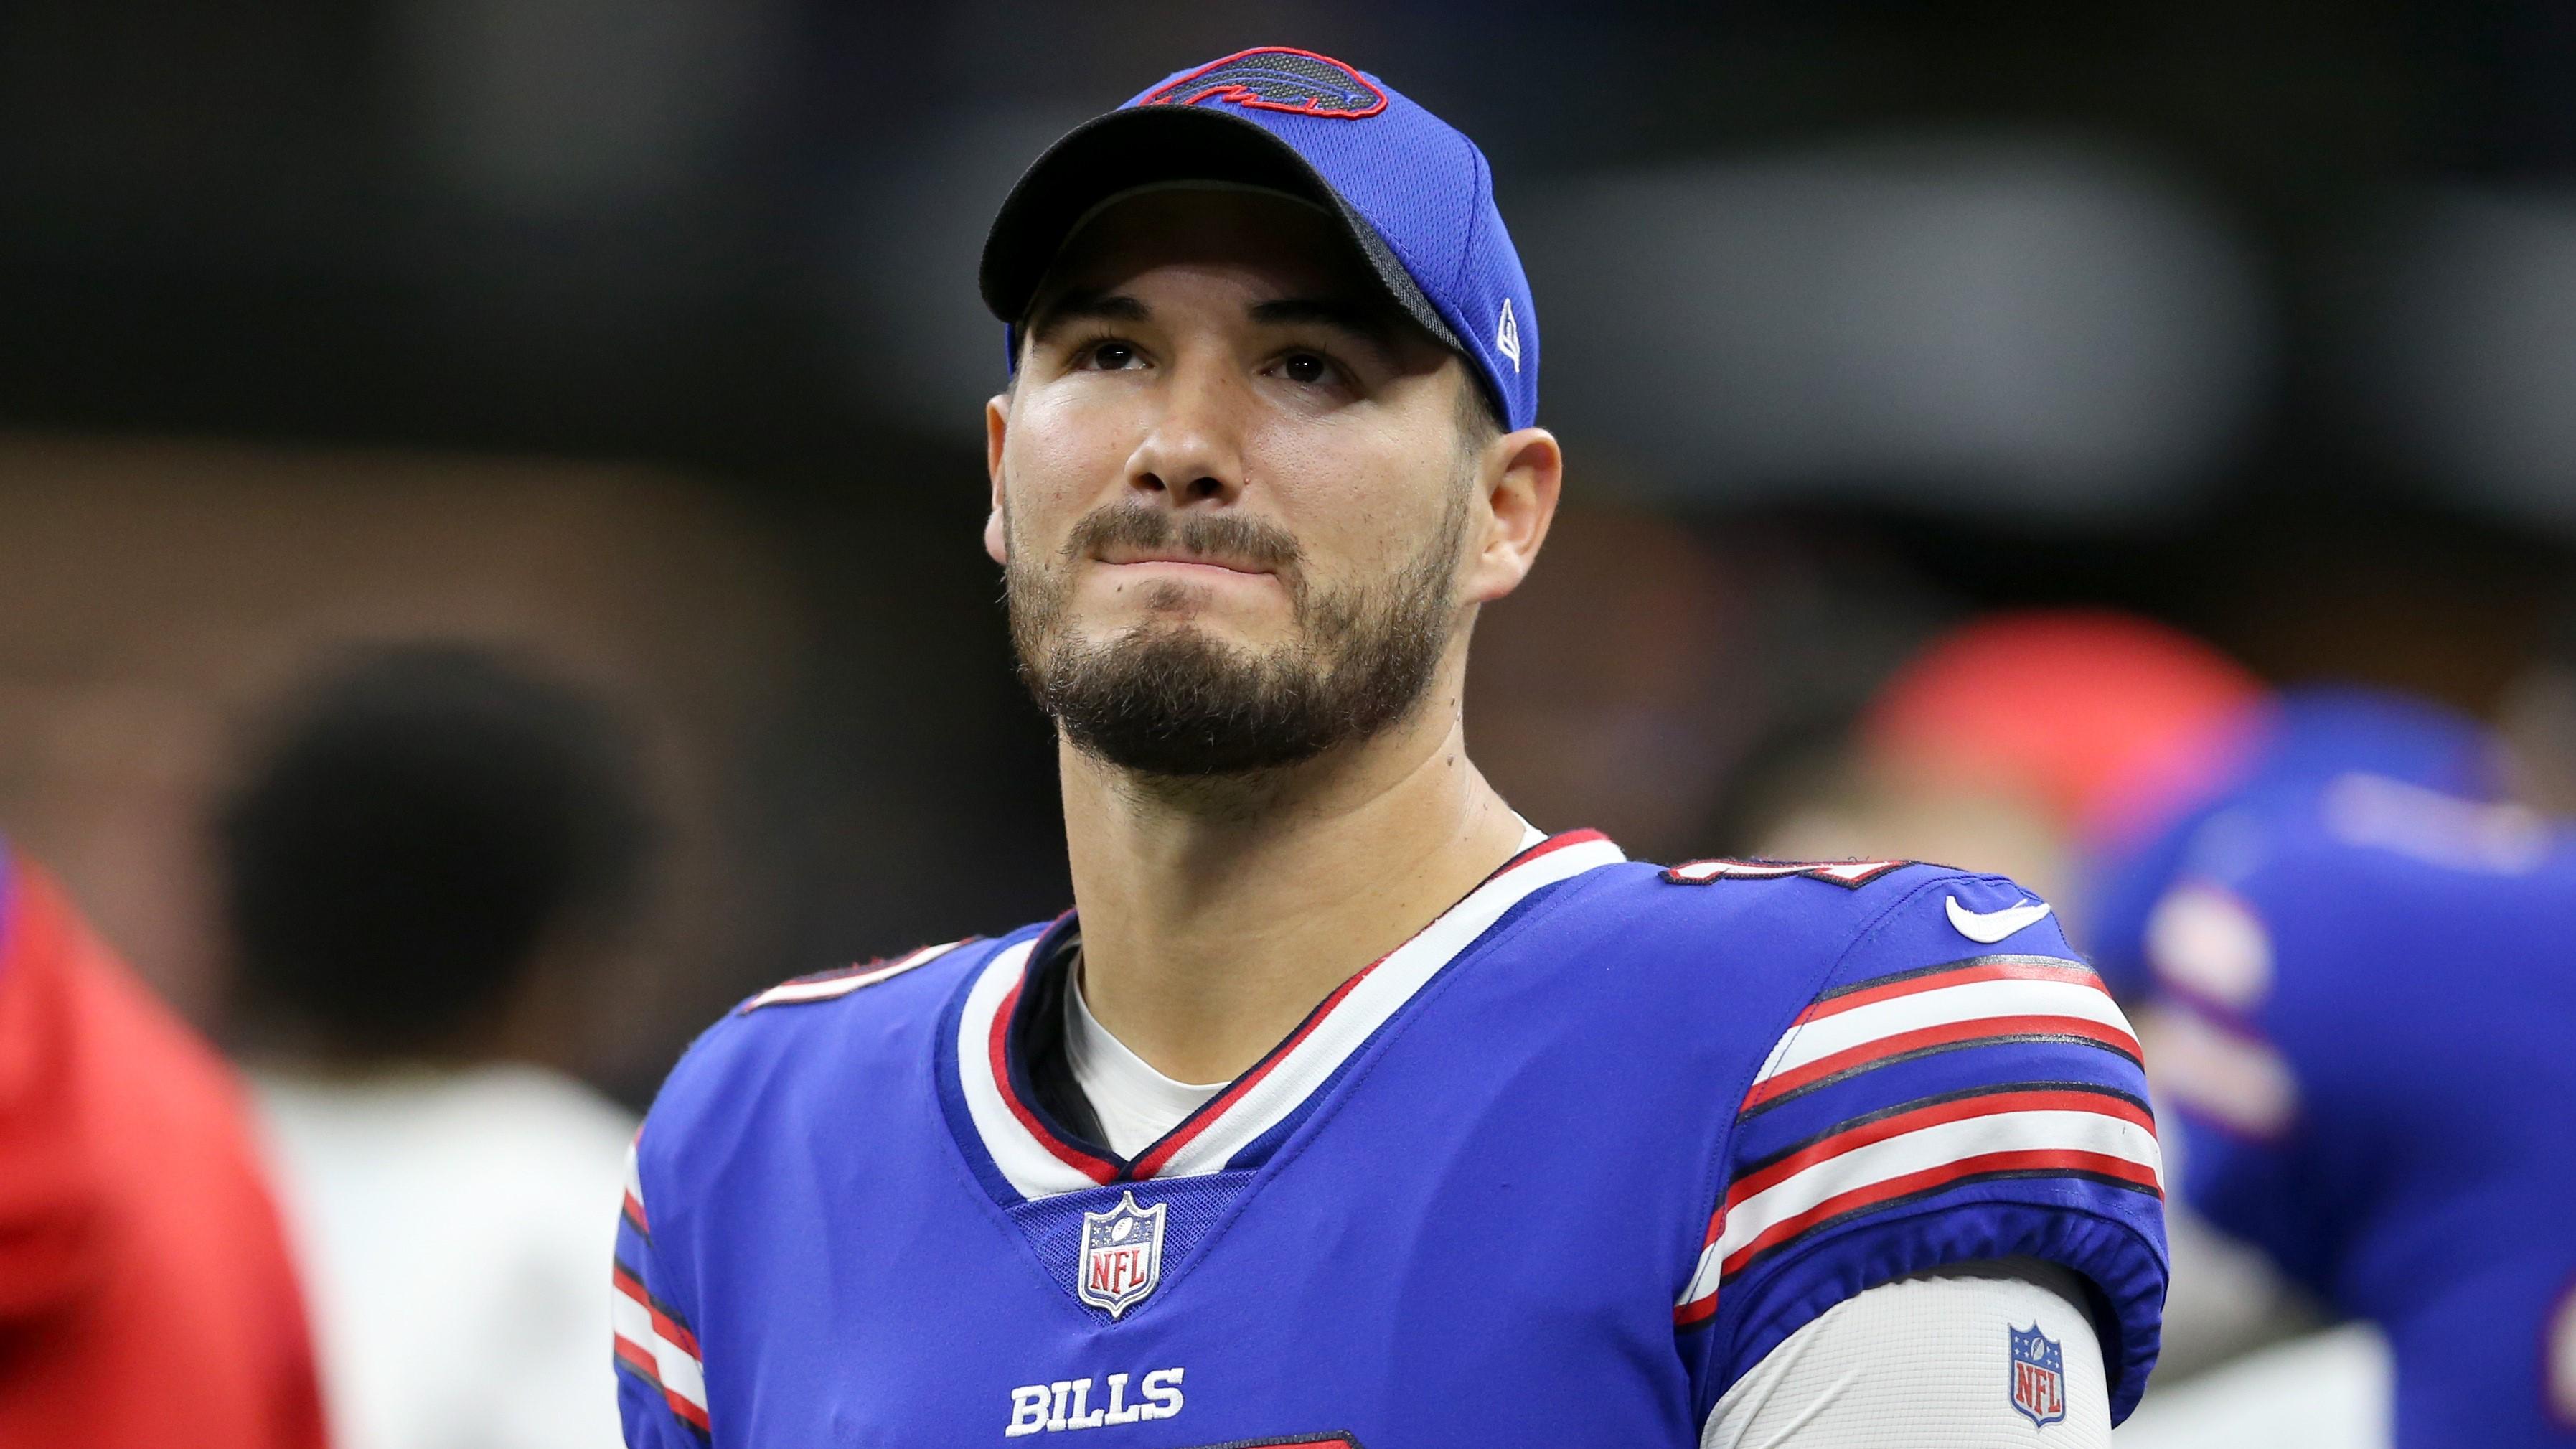 Buffalo Bills quarterback Mitchell Trubisky (10) on the sidelines in the second half of their game against the New Orleans Saints at the Caesars Superdome. / Chuck Cook/USA TODAY